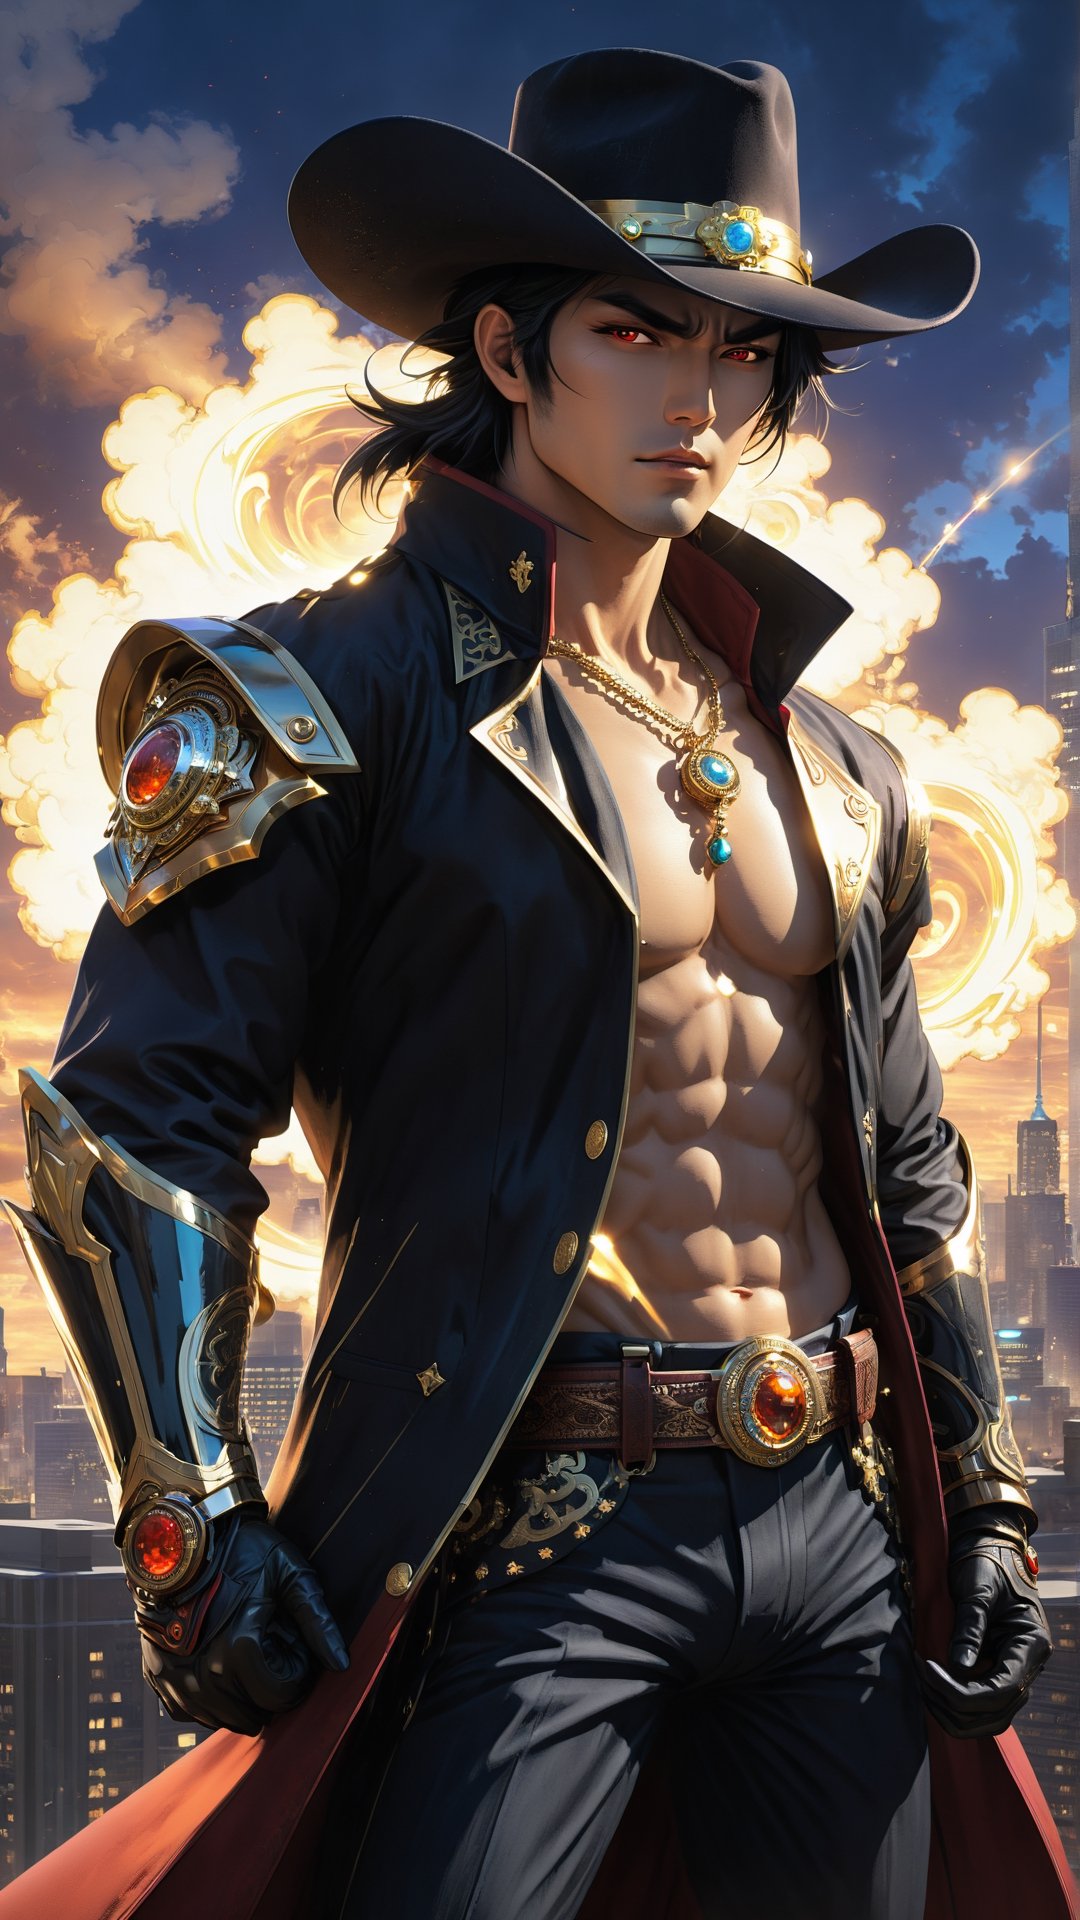 A captivating anime illustration of (lucky luck the lonesome cowboy:1.5), transformed into a super powerful and mystic creature. His eyes are filled with energy and power, with a captivating aura surrounding his body. He stands tall, confidently posing with his hands on his hips. The background includes a cinematic cityscape, with towering buildings and a setting sun. The overall atmosphere of the scene is a blend of action and fantasy, with a touch of drama., illustration, cinematic, anime